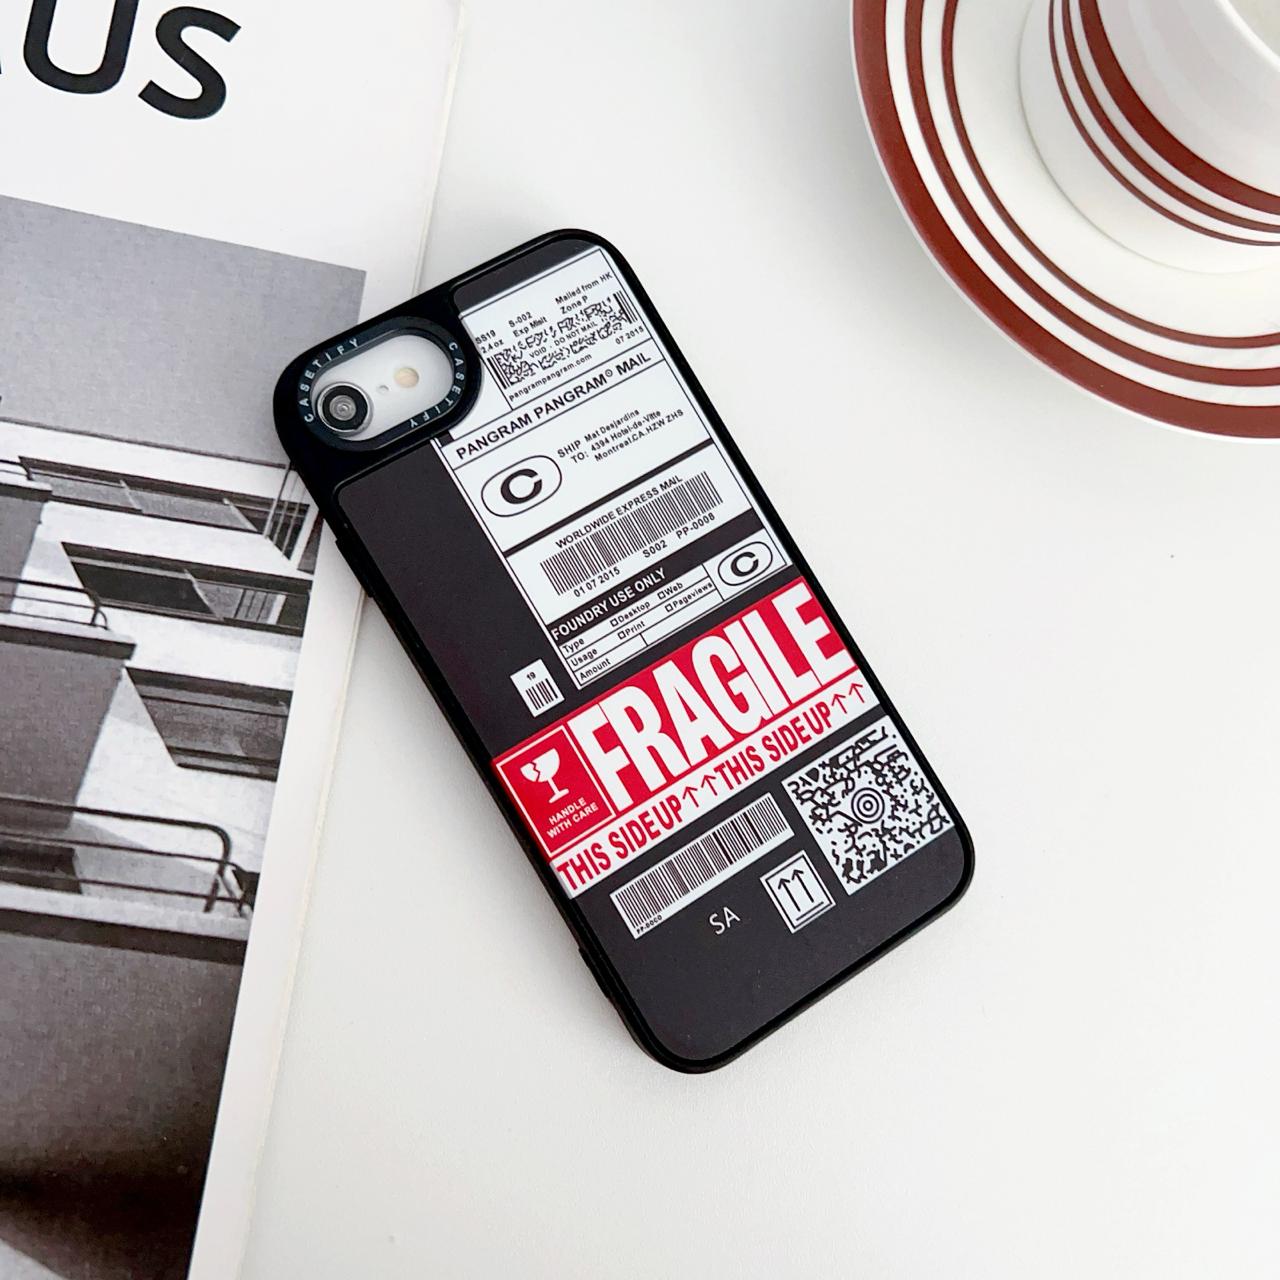 Nypsun Designer iPhone covers, Scratch Resistance and Shockproof Fragile